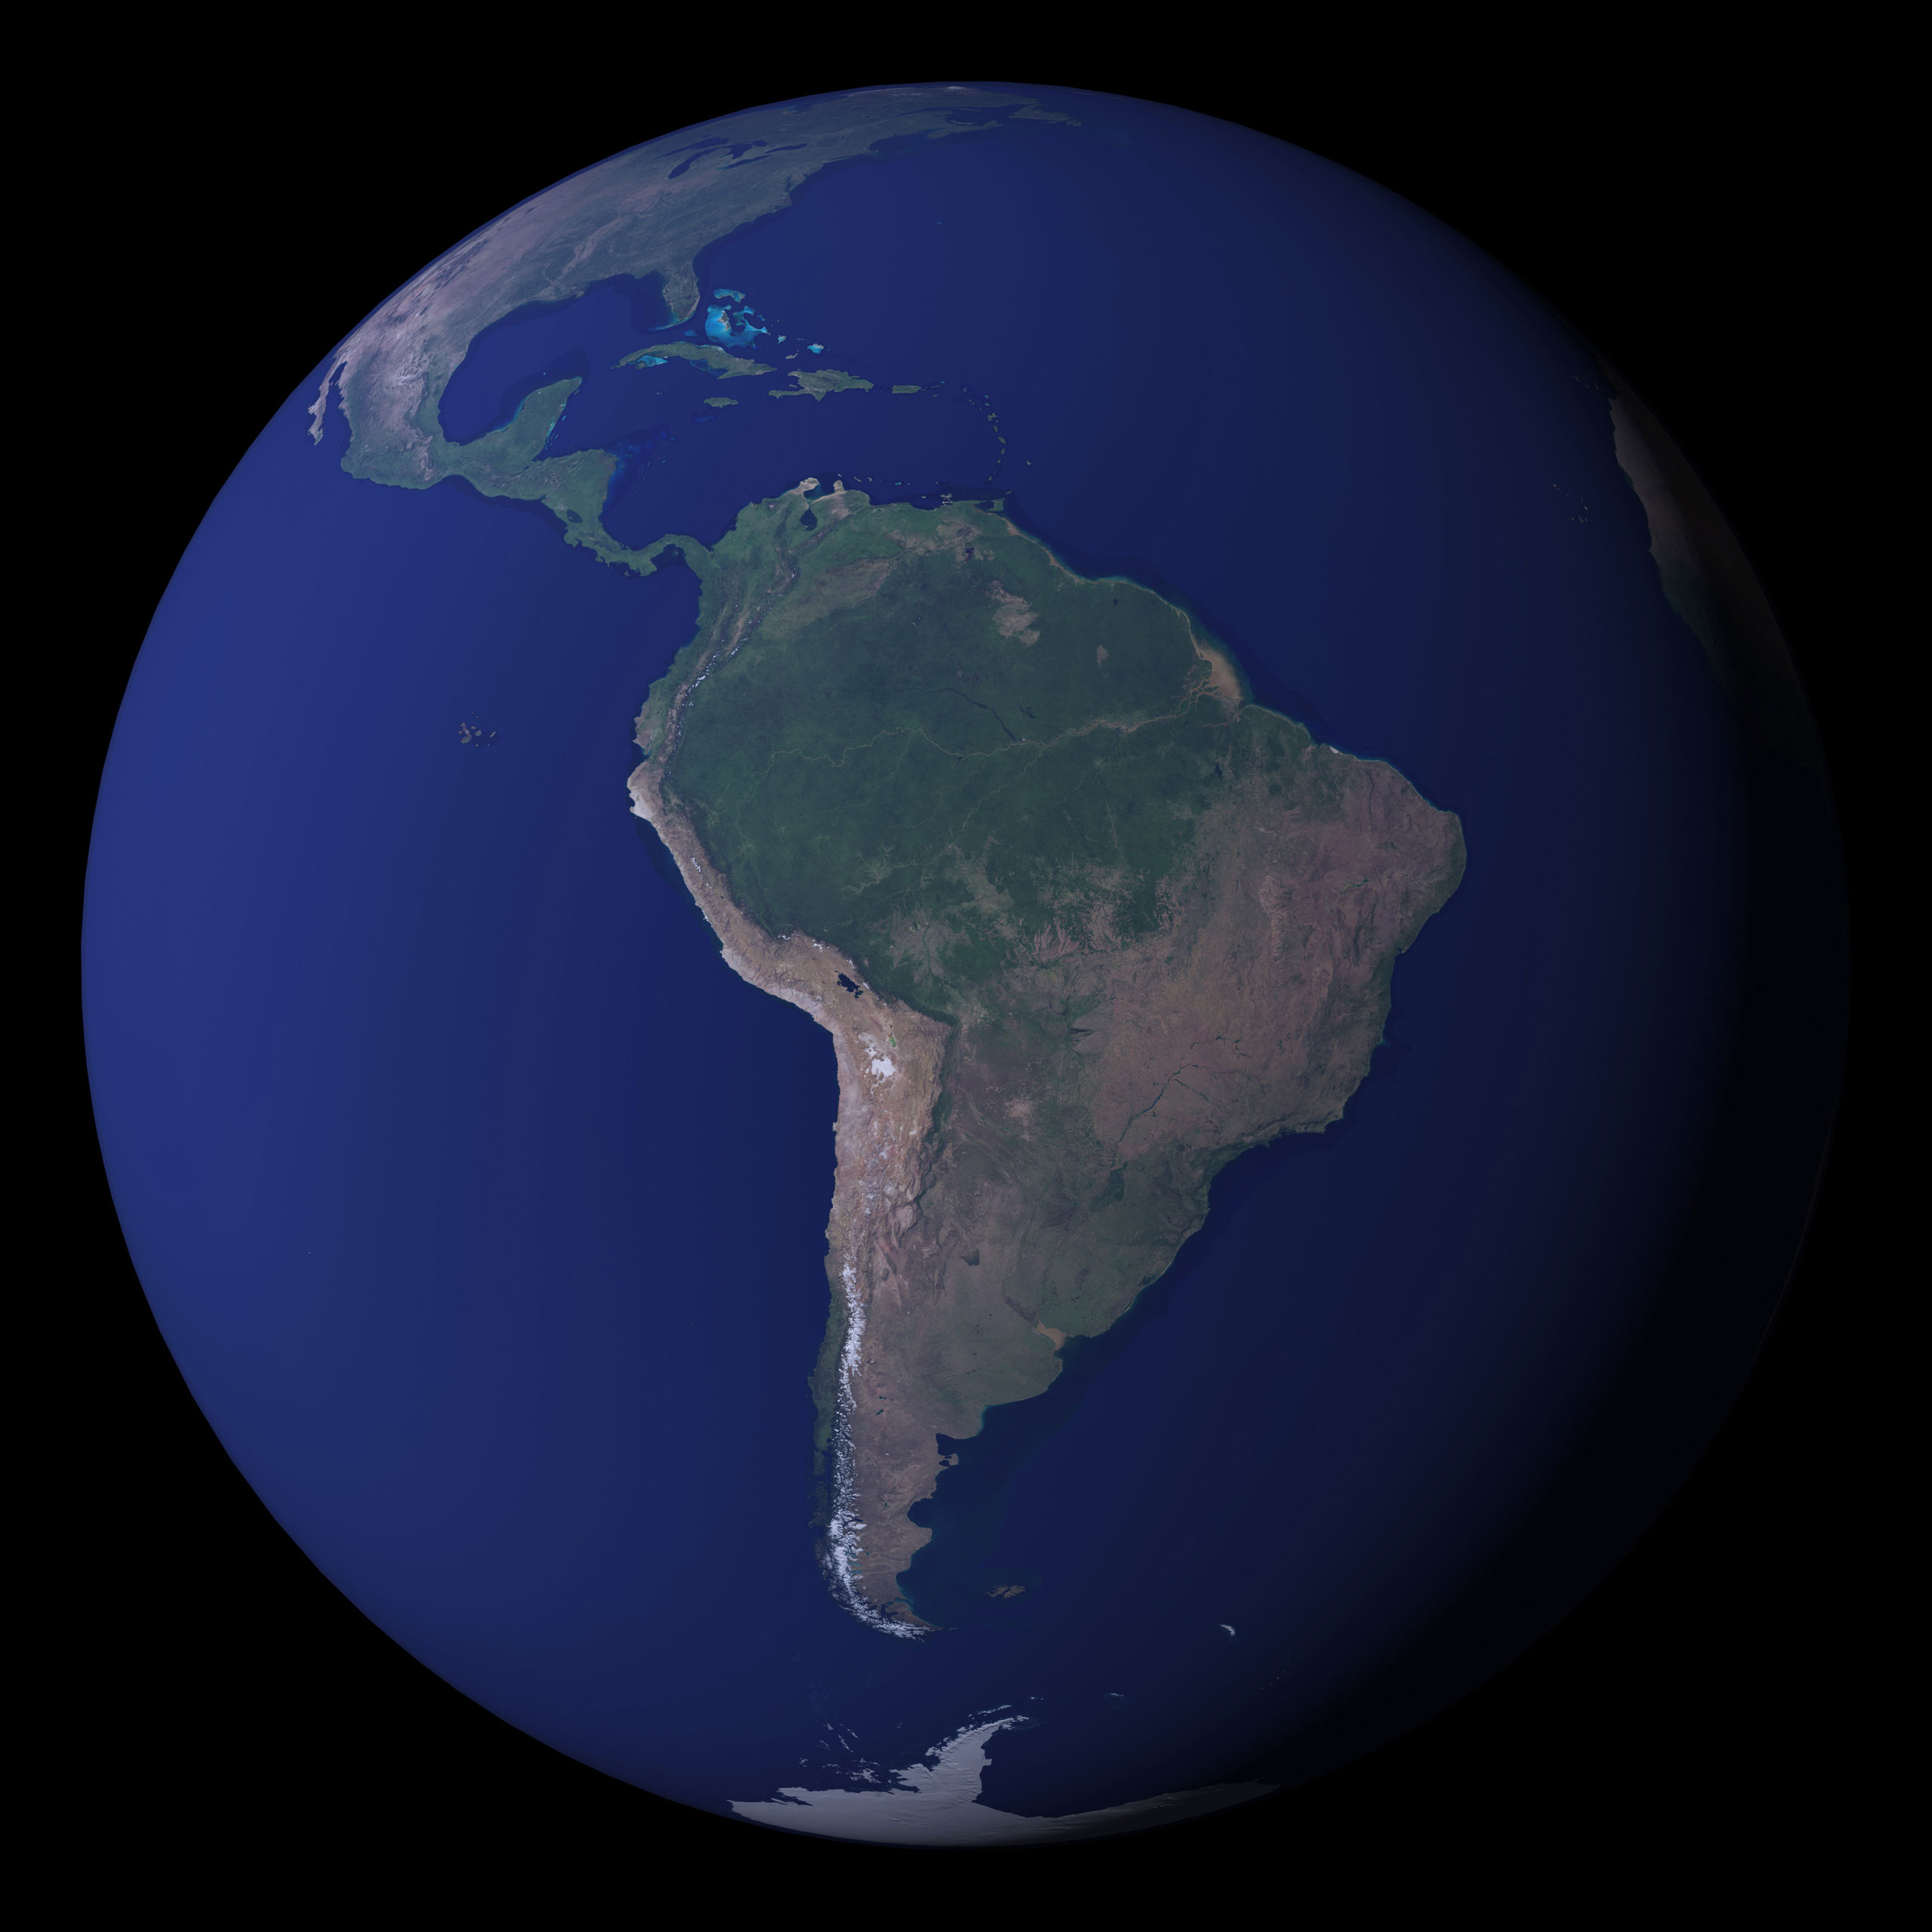 The Blue Marble: Next Generation was a series of images that show the color of the Earth’s surface for each month of 2004 at very high resolution (500 meters/pixel) at a global scale. This image is a mosaic showing South America from September 2004 (with clouds removed).